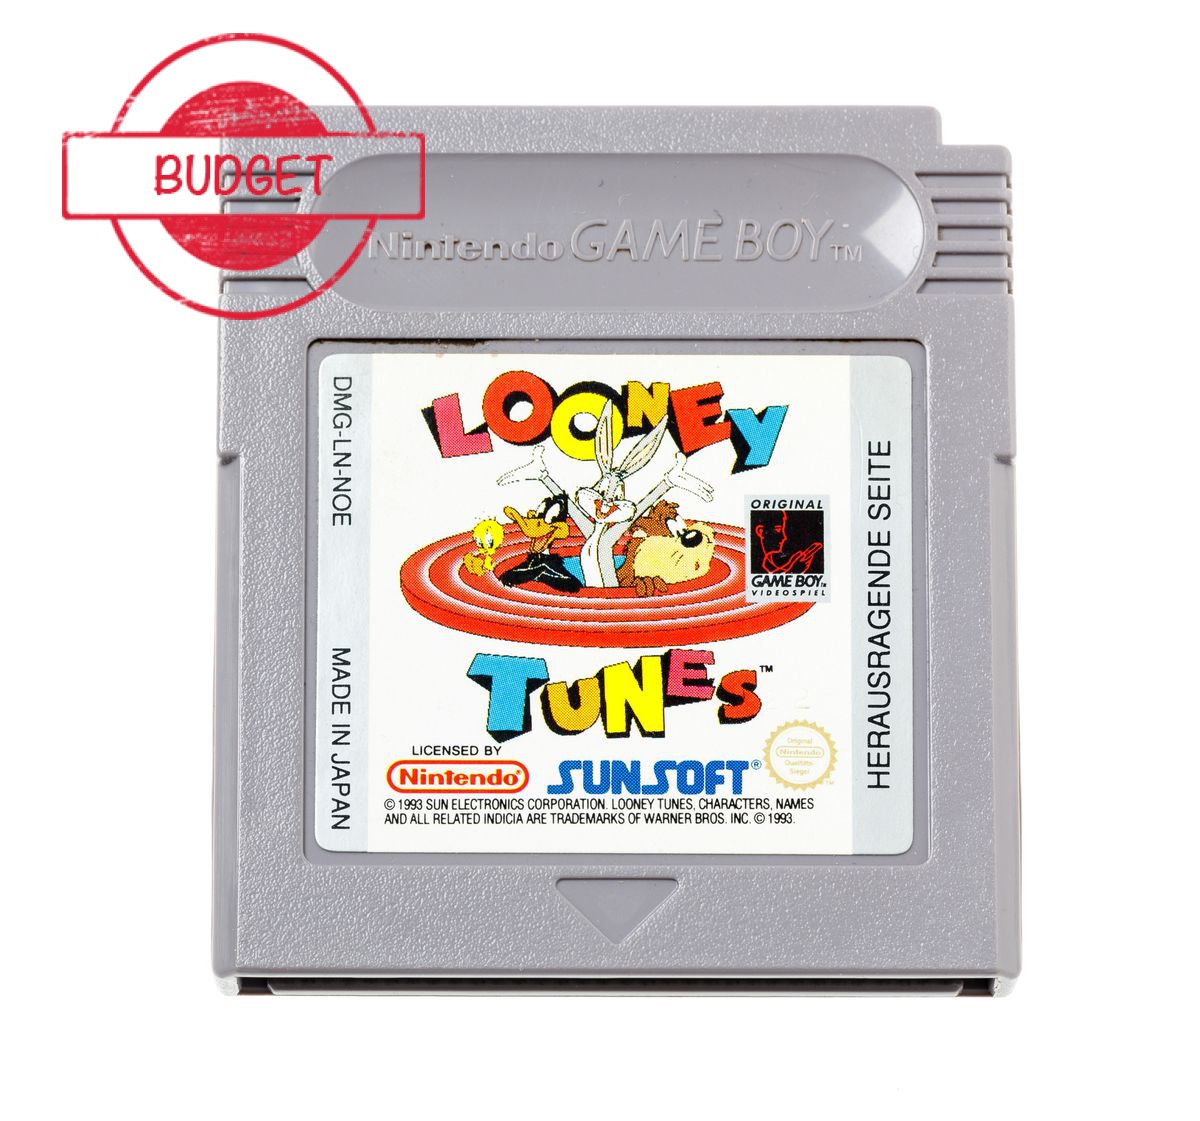 Looney Tunes - Budget - Gameboy Classic Games